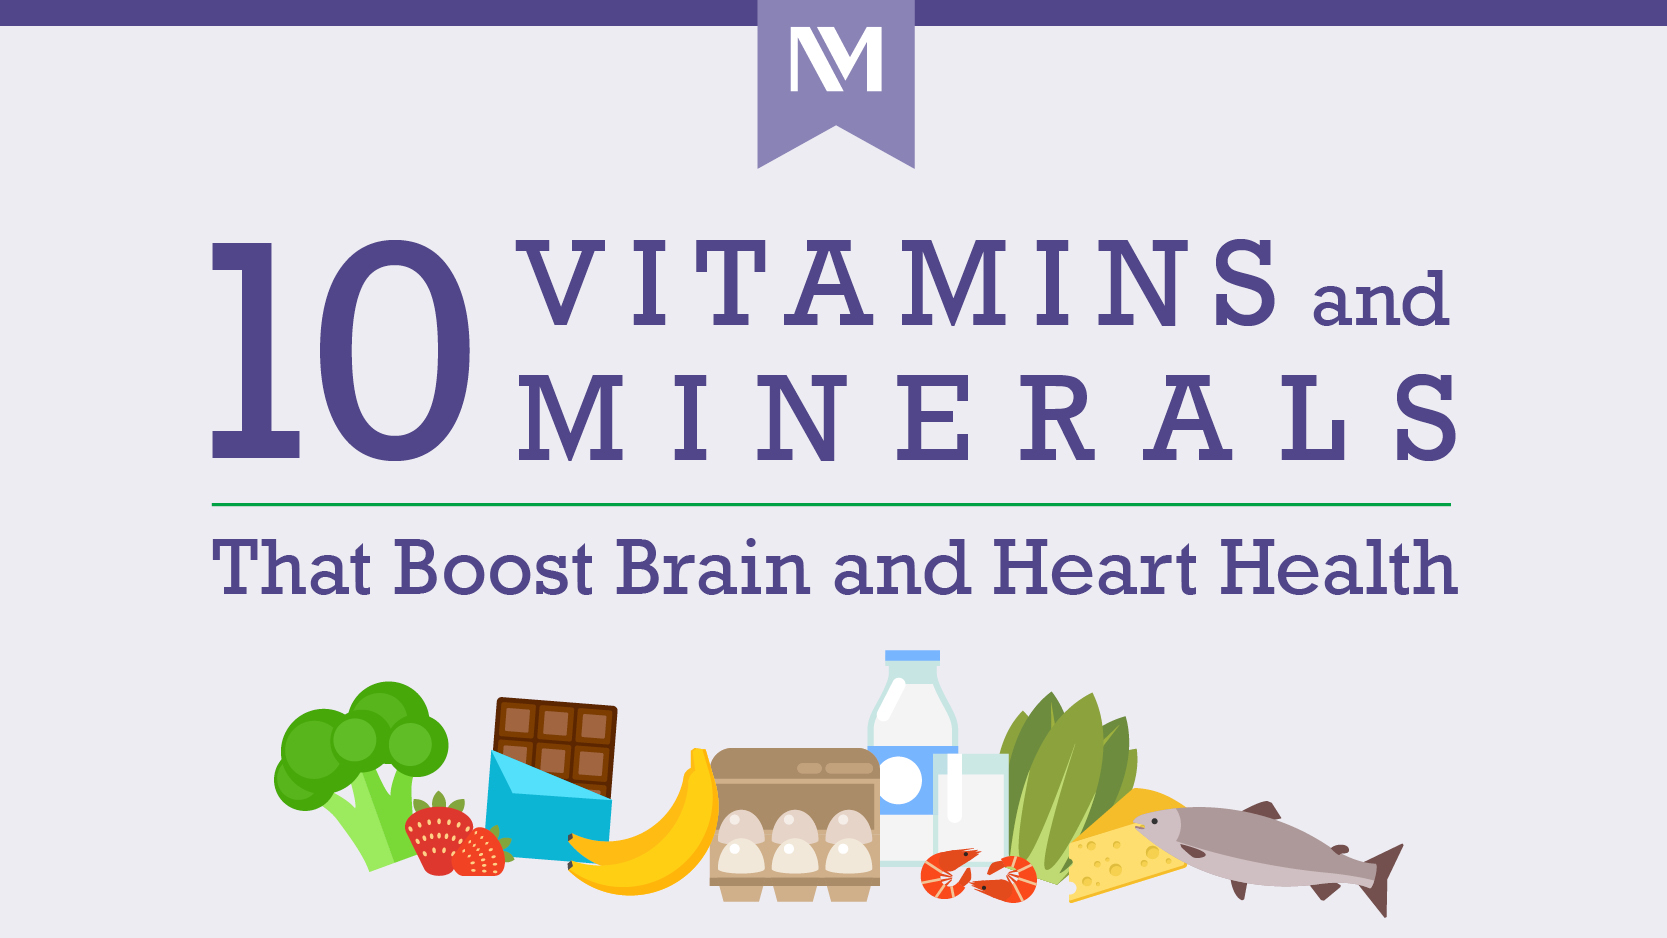 10 Vitamins And Minerals That Boost Brain And Heart Health Infographic Northwestern Medicine